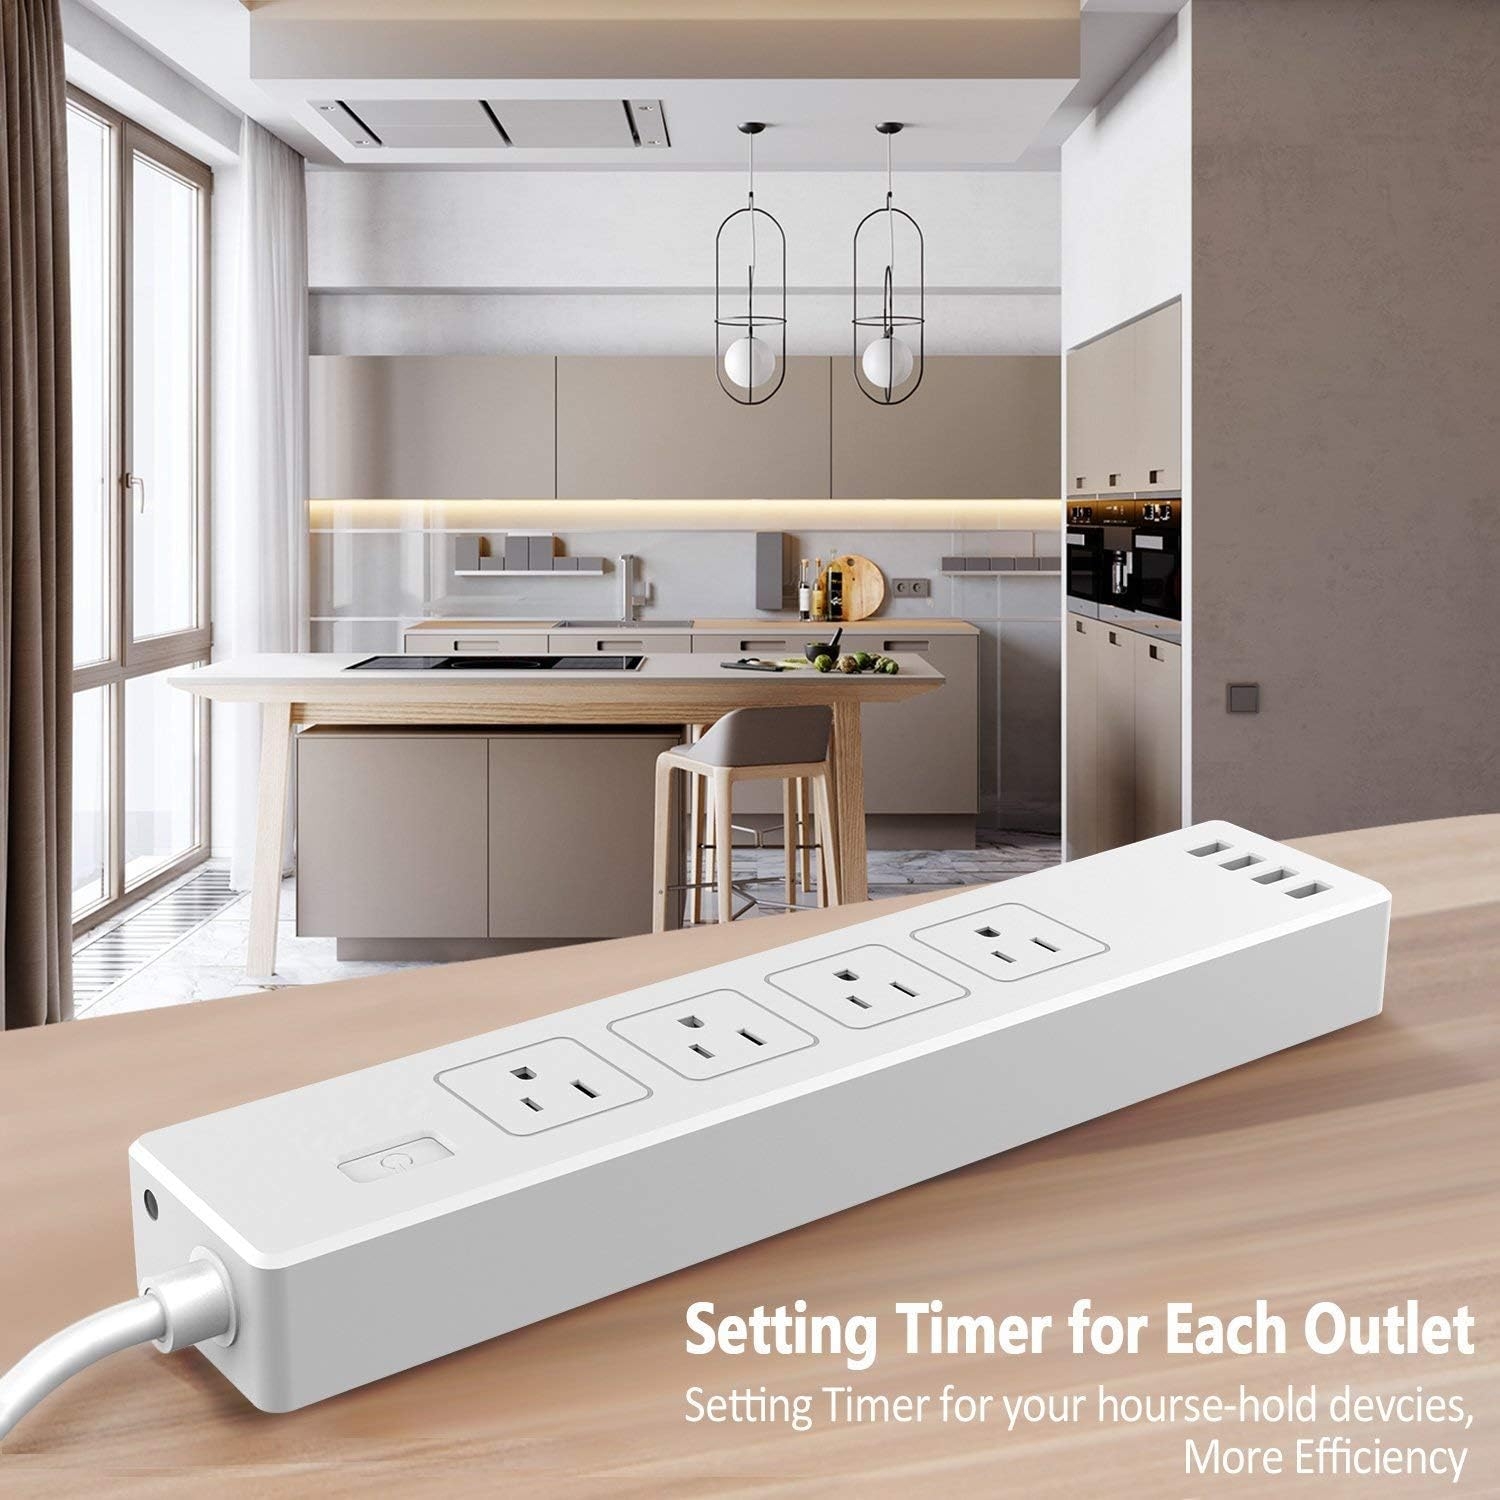 WiFi Smart Power Strip Surge Protector with 4 Smart Plugs and 4 USB Ports and 5.9ft Long Extension Power Cord, Work with Alexa & Google Assistant